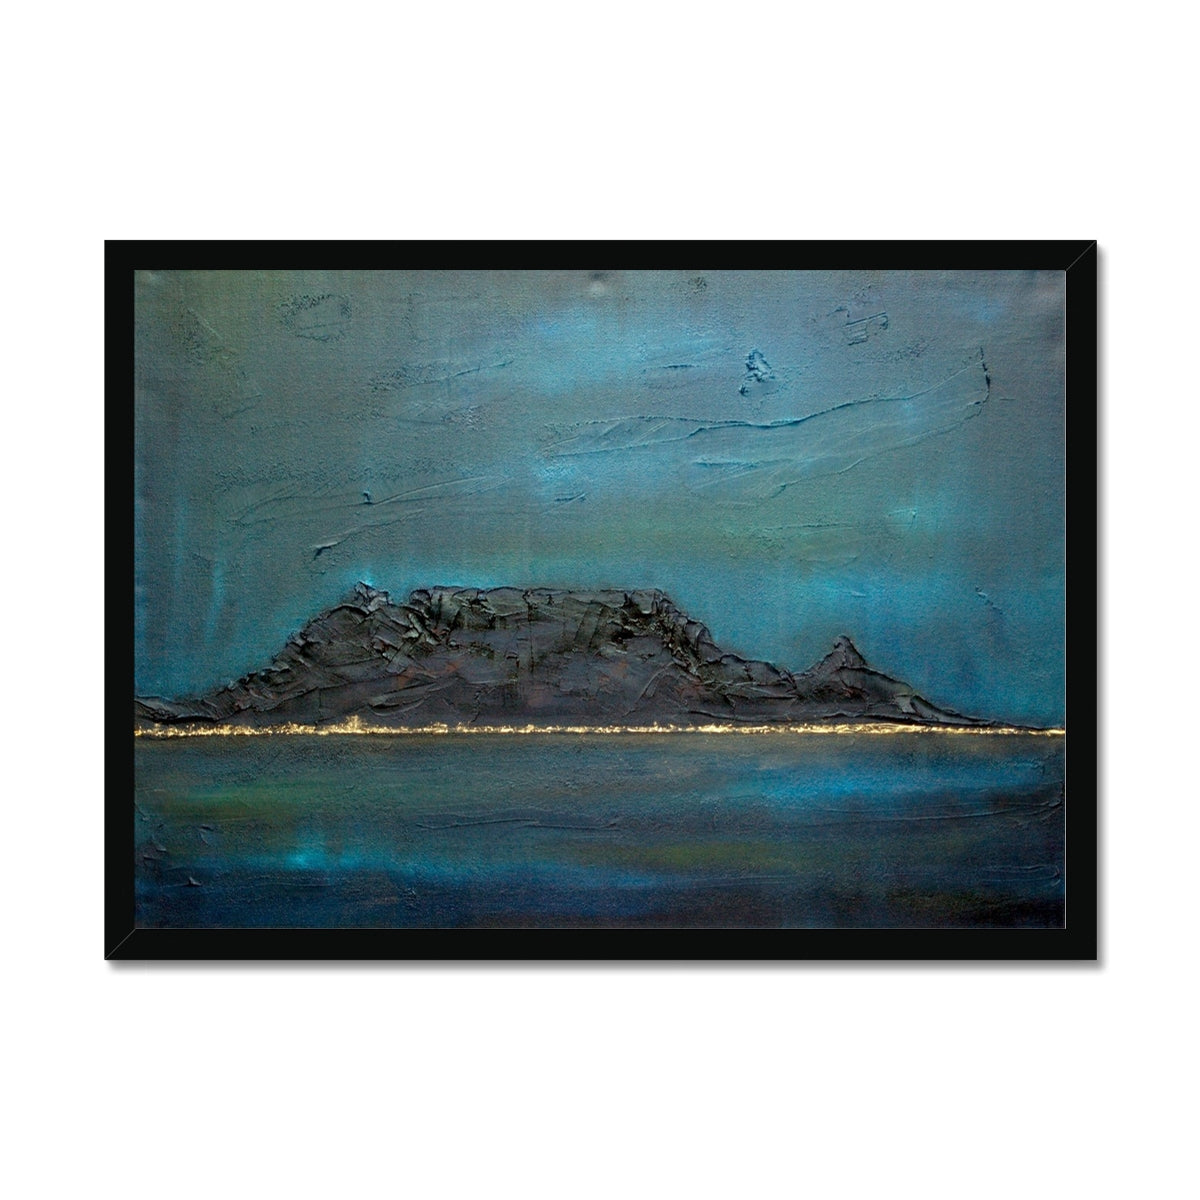 Table Mountain Dusk Painting | Framed Prints From Scotland-Framed Prints-World Art Gallery-A2 Landscape-Black Frame-Paintings, Prints, Homeware, Art Gifts From Scotland By Scottish Artist Kevin Hunter